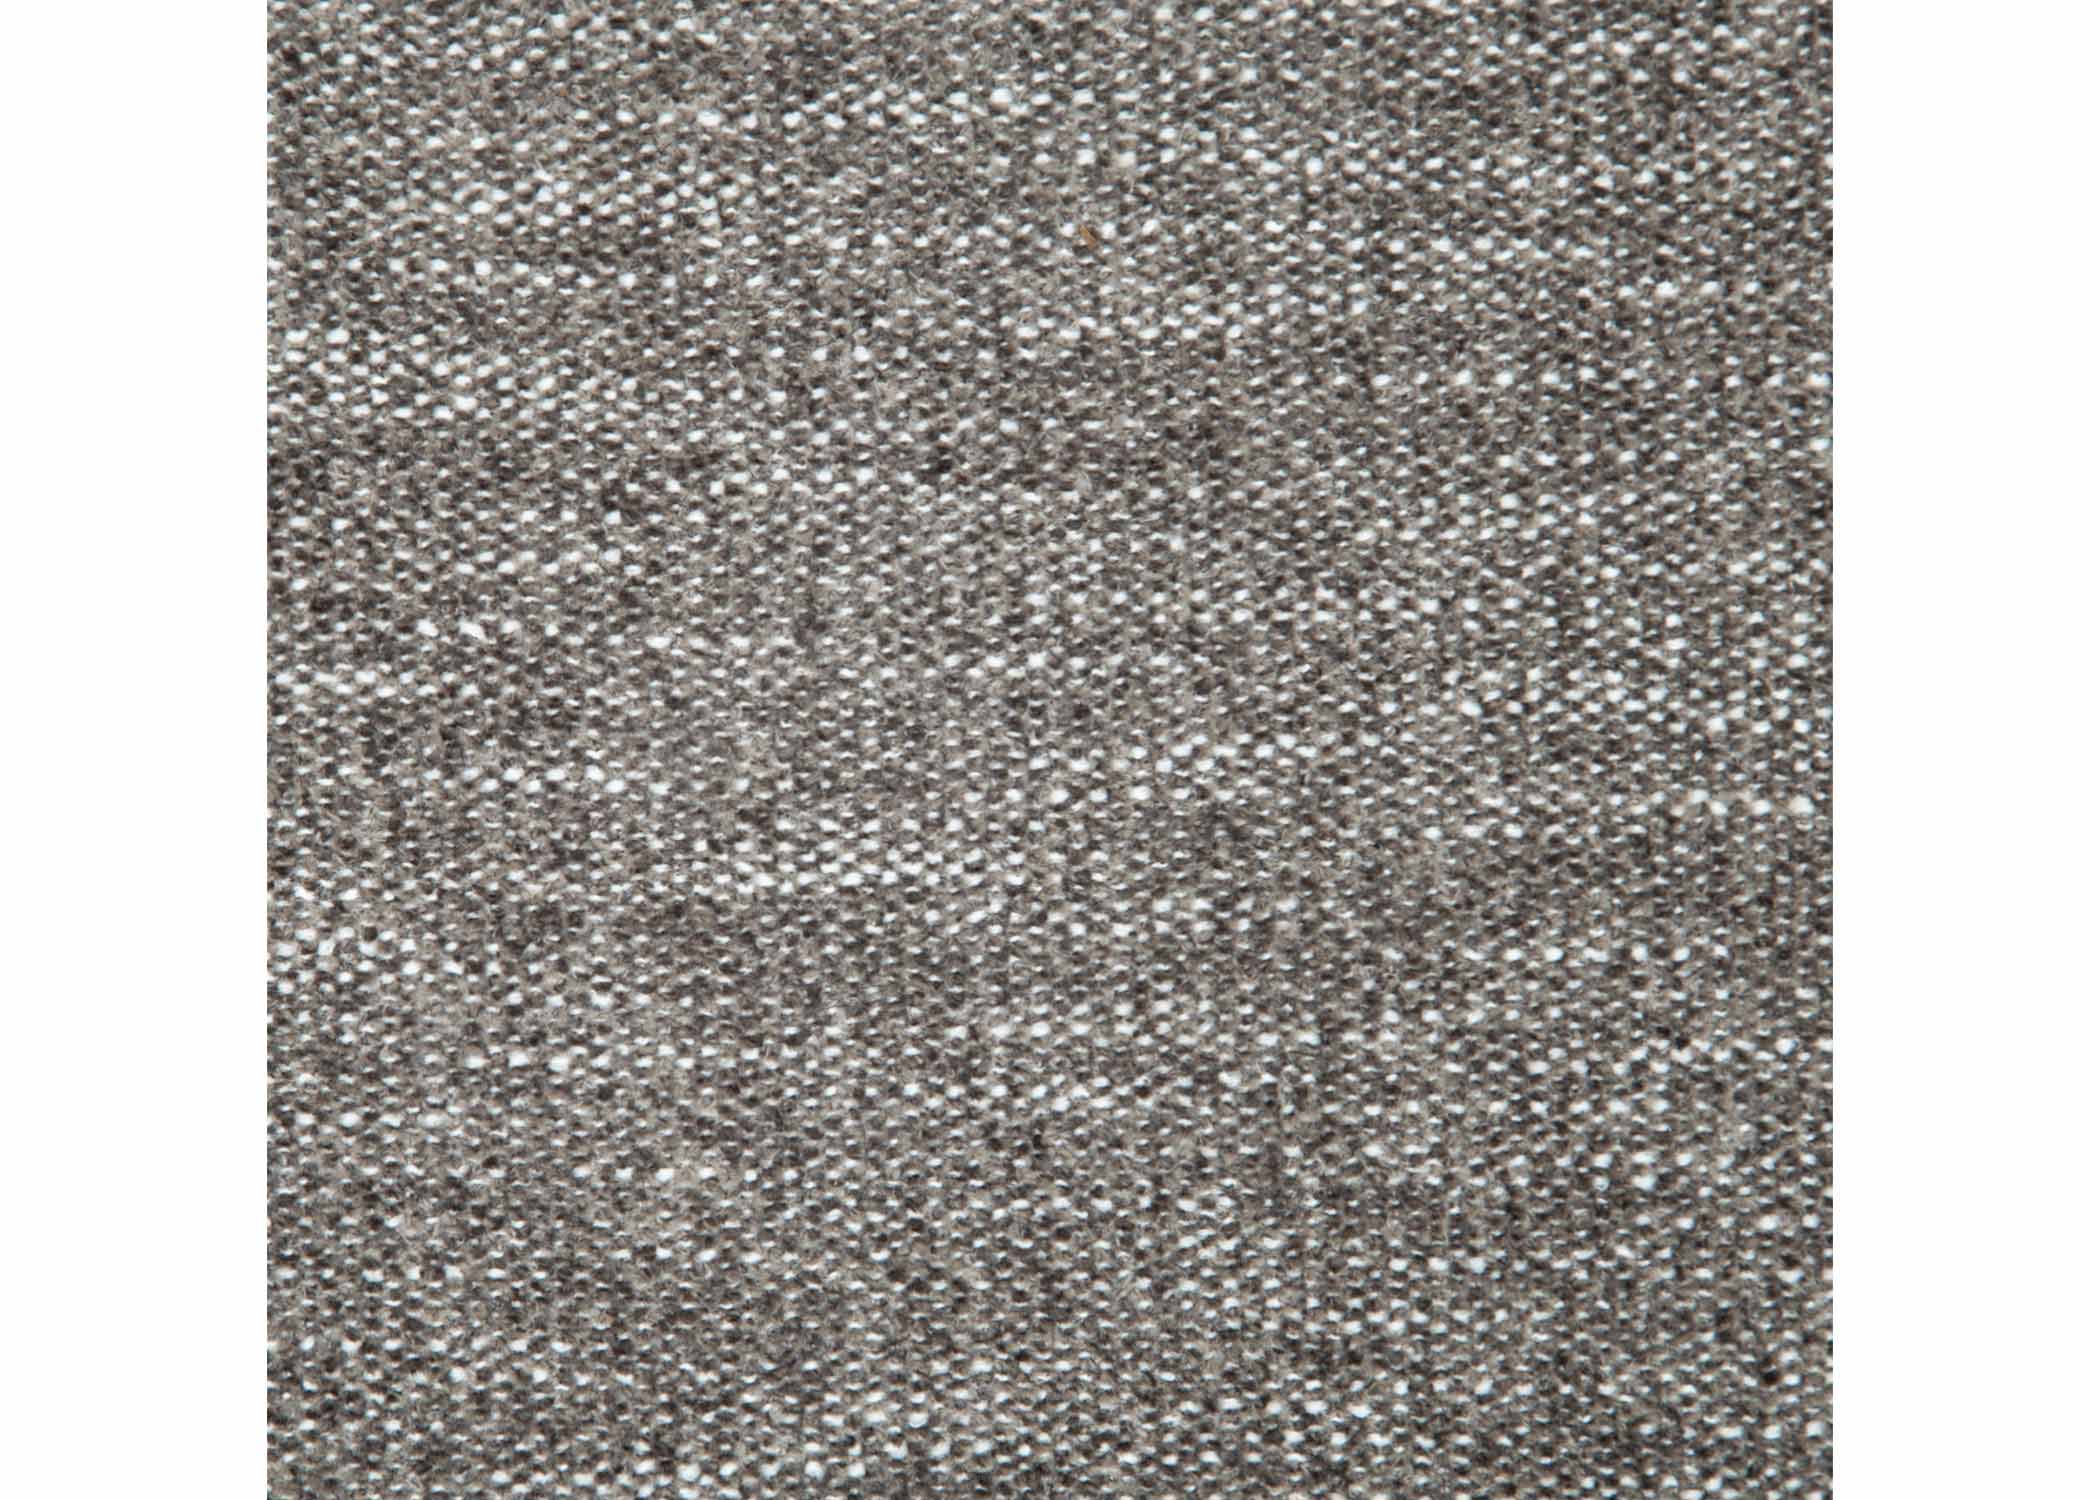  3806-05 Handwoven Pewter 